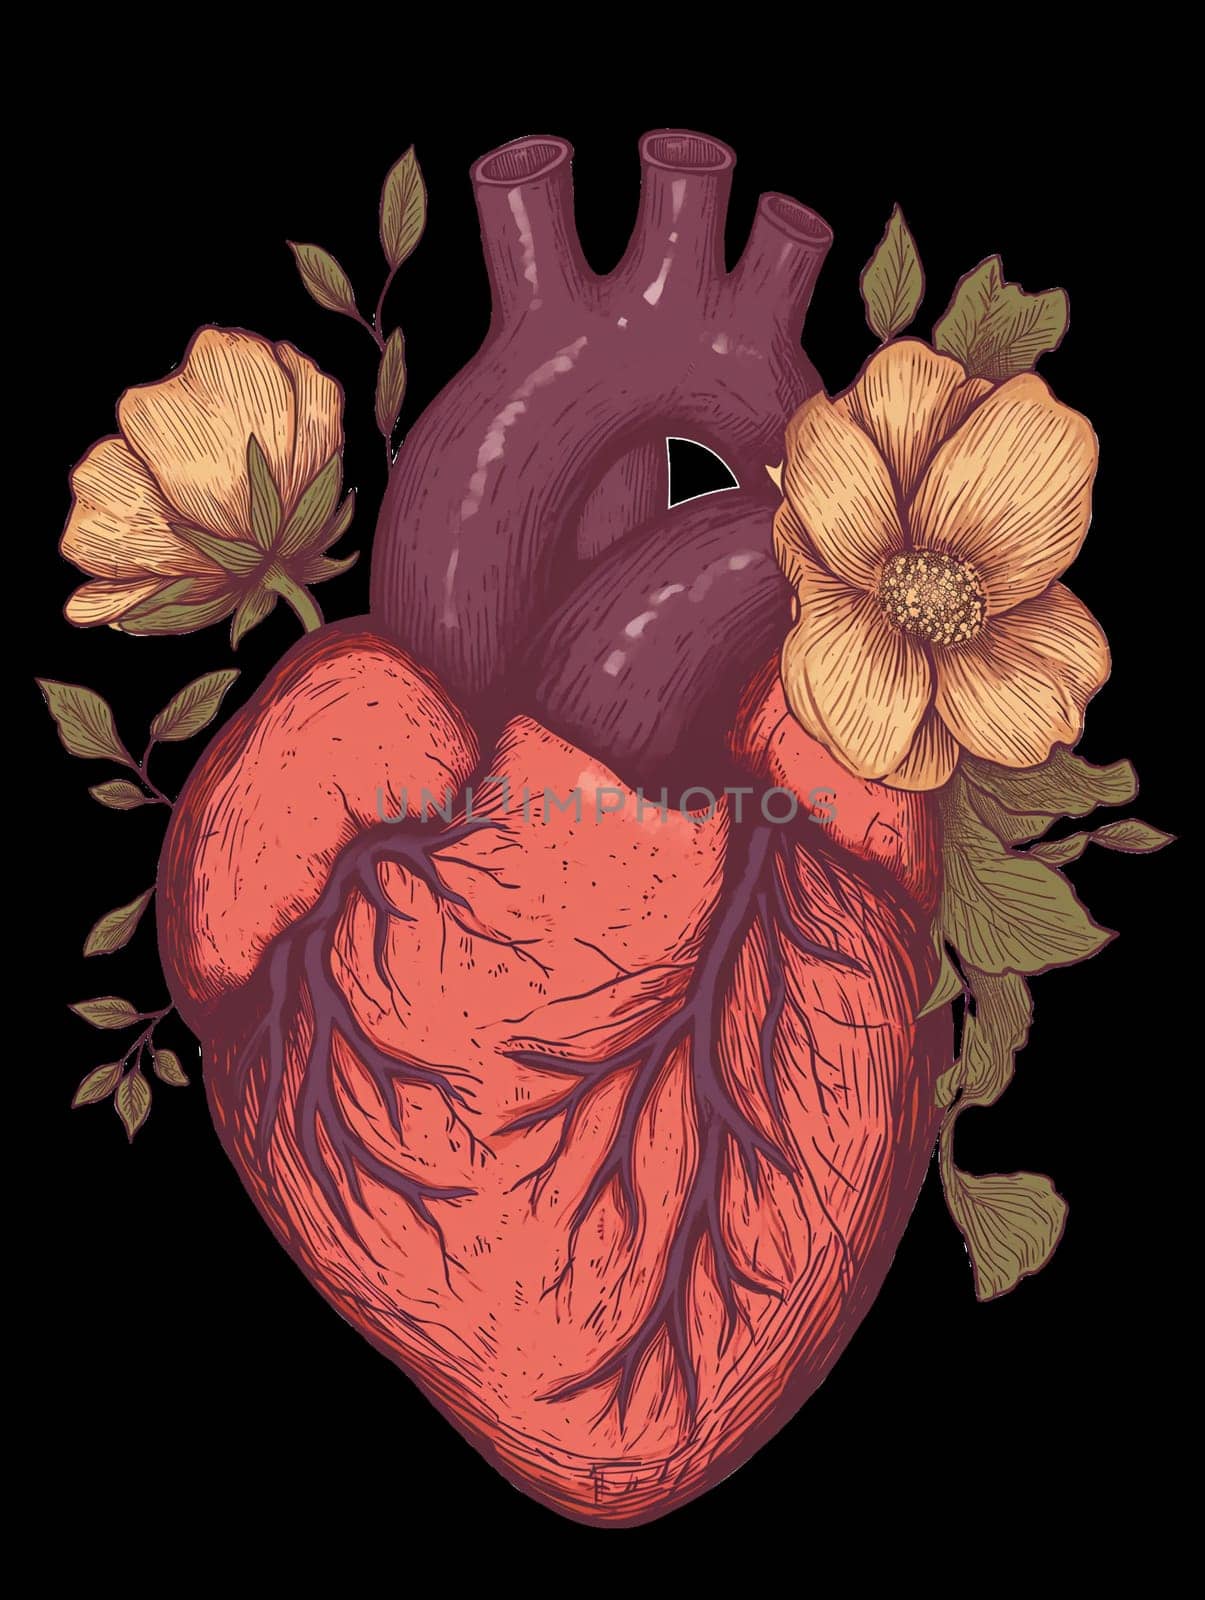 Hand Drawn Illustration of Flower Blooming Heart. Valentine's Day T-shirt and Print Template, Png on Transparent Background.